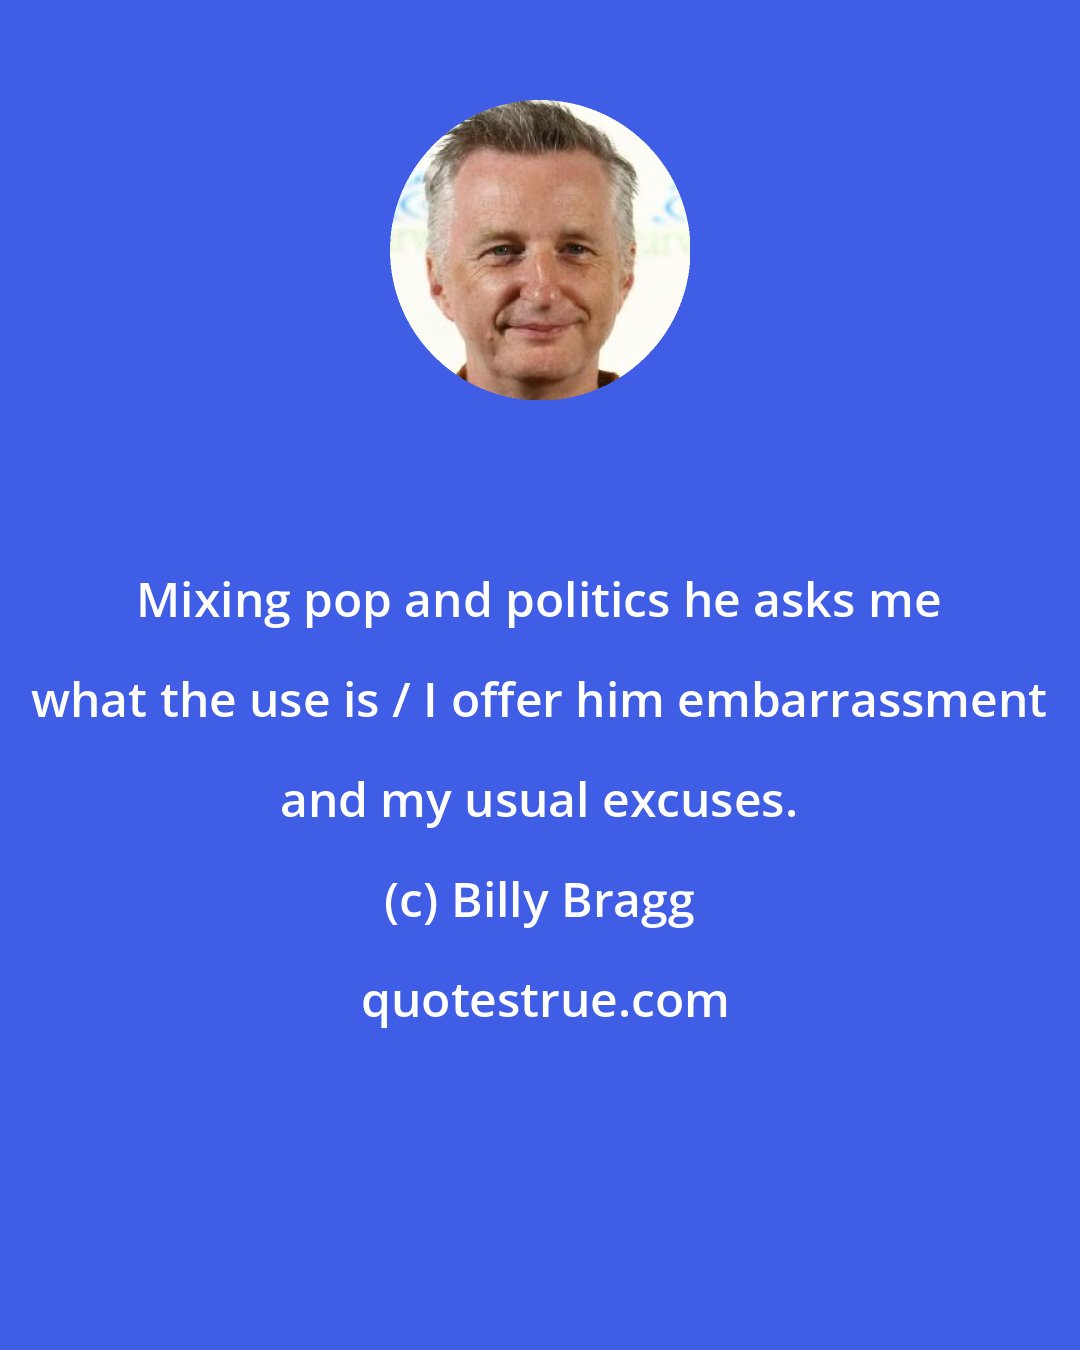 Billy Bragg: Mixing pop and politics he asks me what the use is / I offer him embarrassment and my usual excuses.